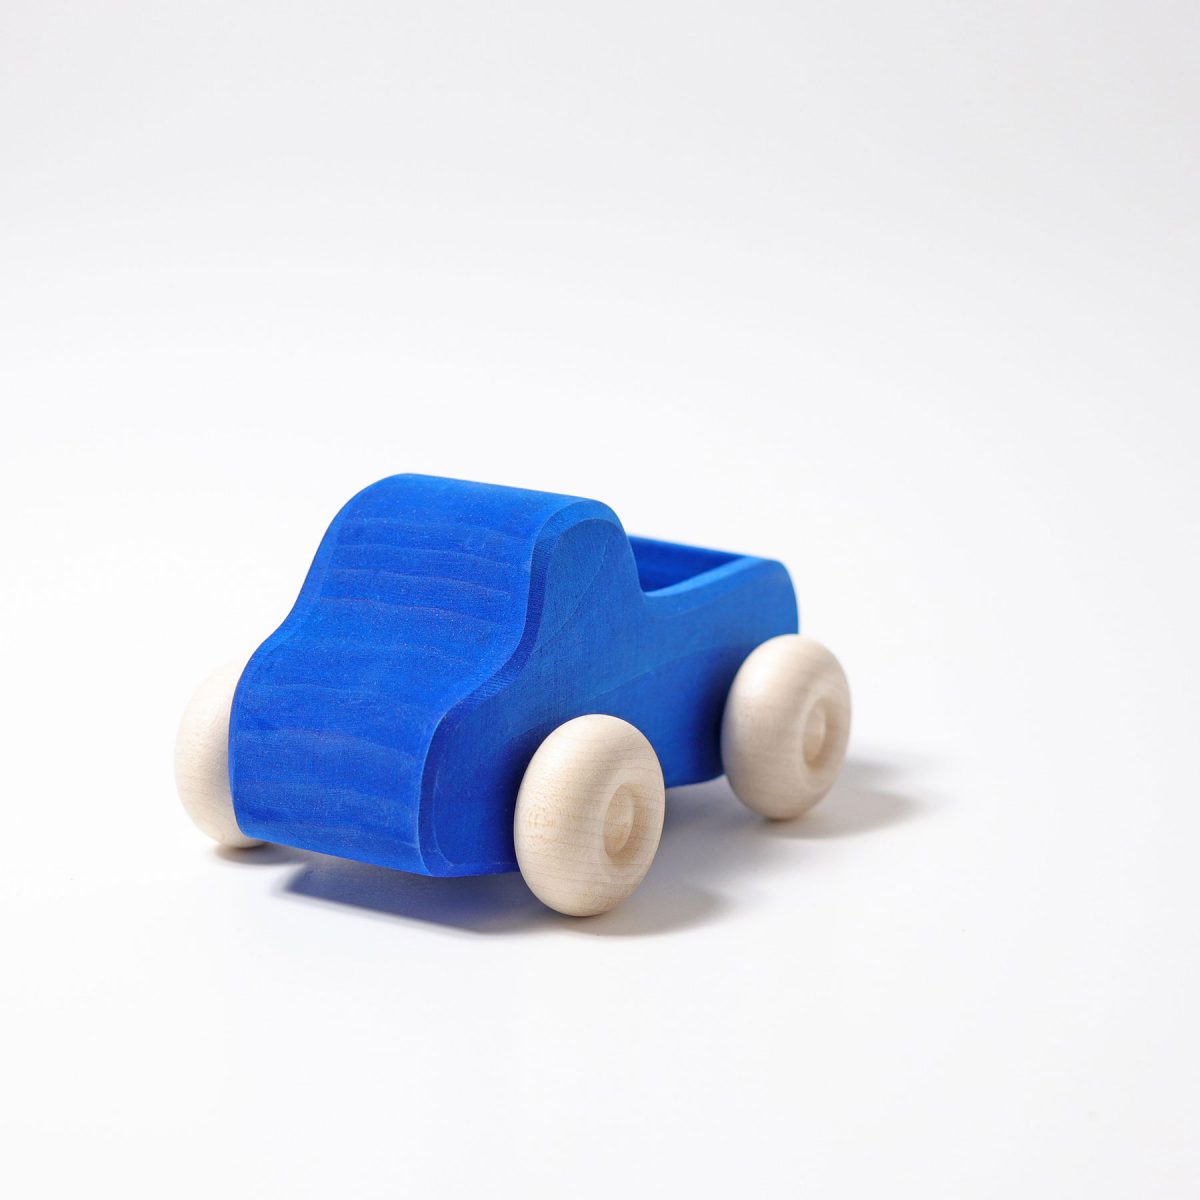 Grimms Small Blue Truck | Wooden Car | Children of the Wild